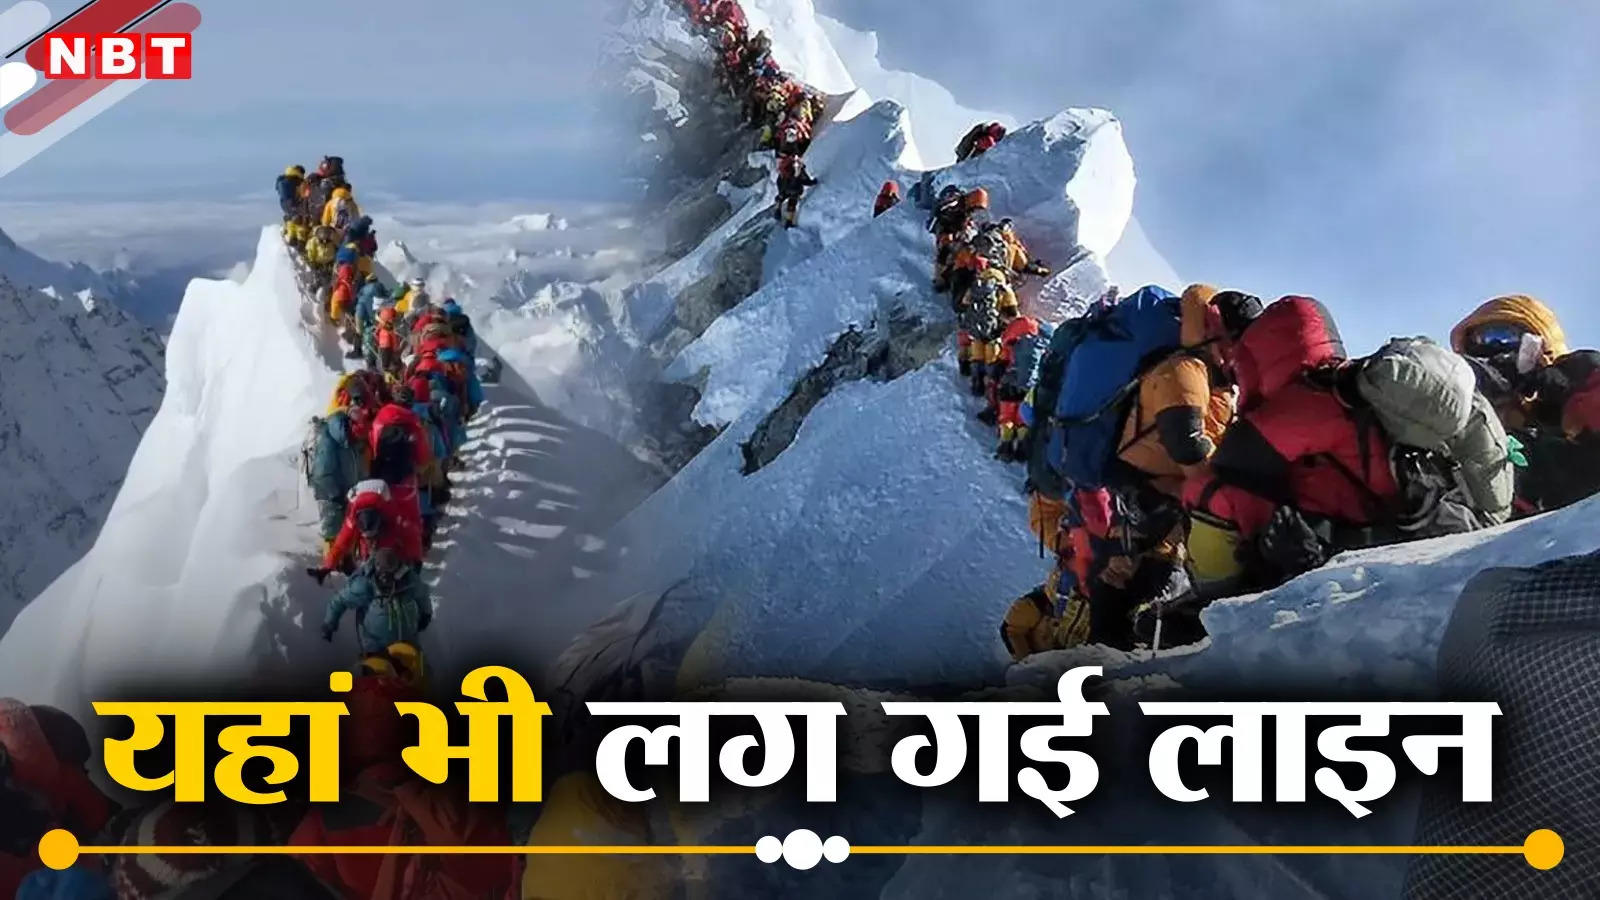 Oh Lord, Oh Harinath… now even the 'roof of the world' is jammed, watch the video